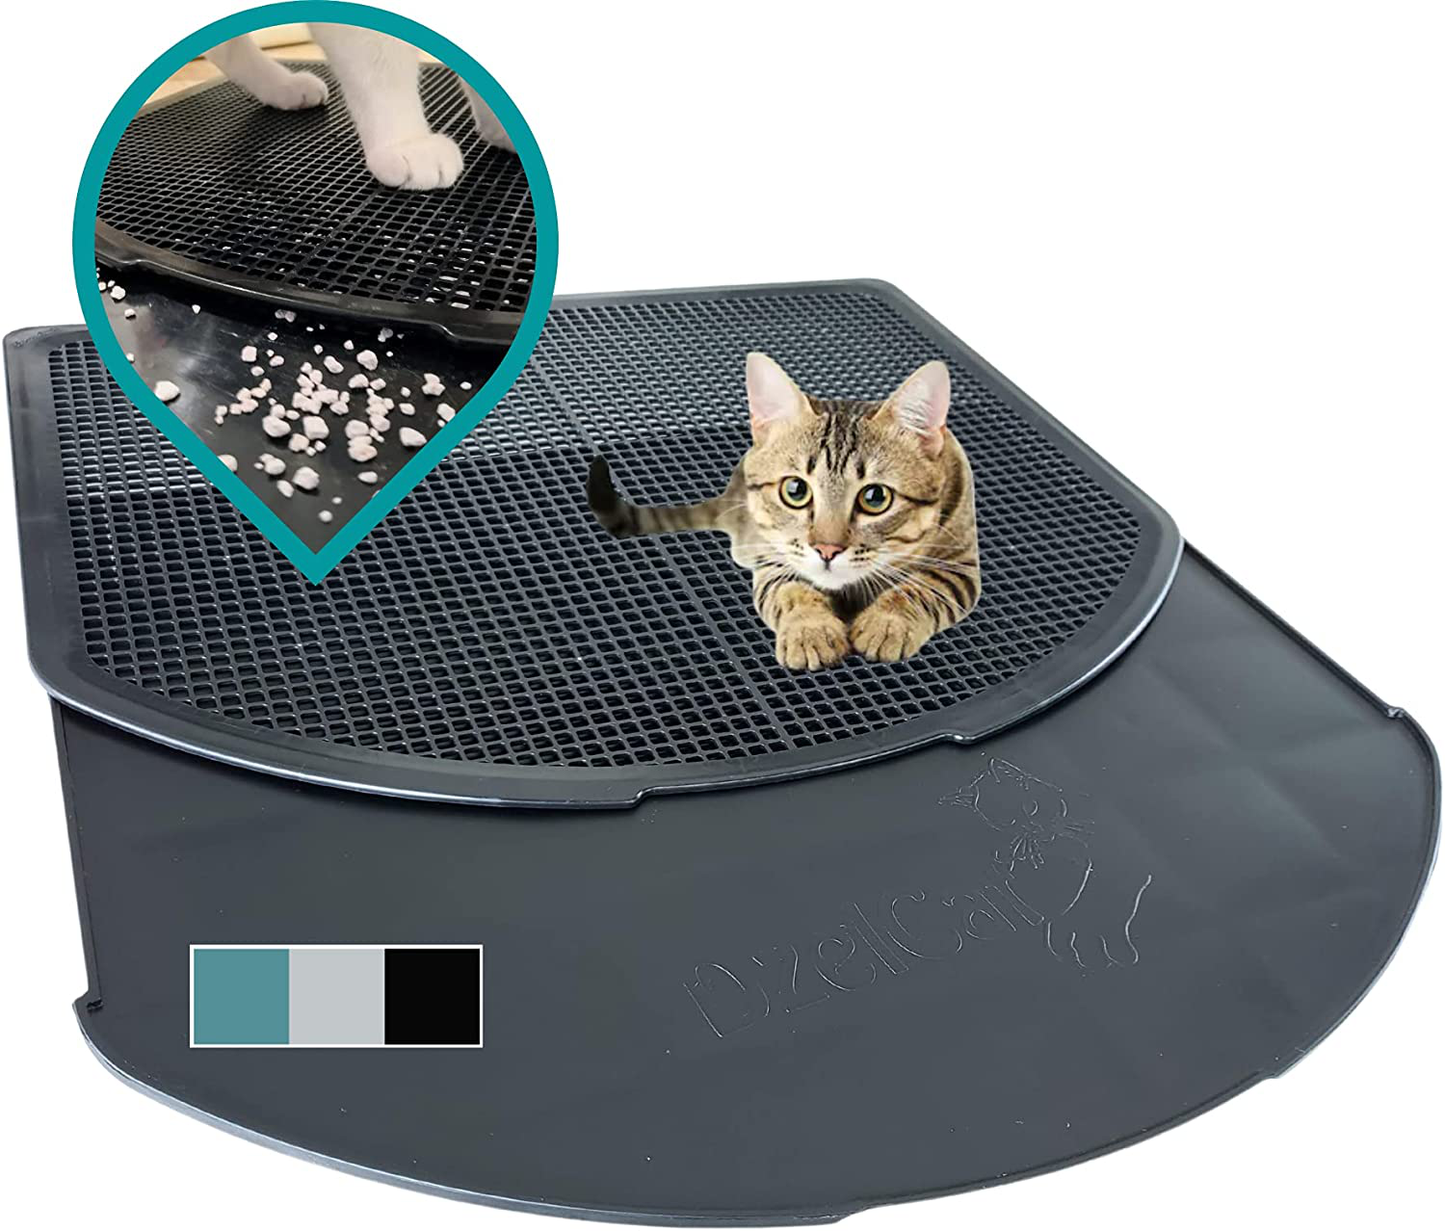 Dzelcat Spreadztrap Cat Litter Mat - Unique Disinfectable Plastic Litter Catcher Tray for Cats & Dogs - Waterproof Large Trapping Box Mat, Easy to Clean, Urine-Proof, Scatter Control, Food Mat 16"X19"